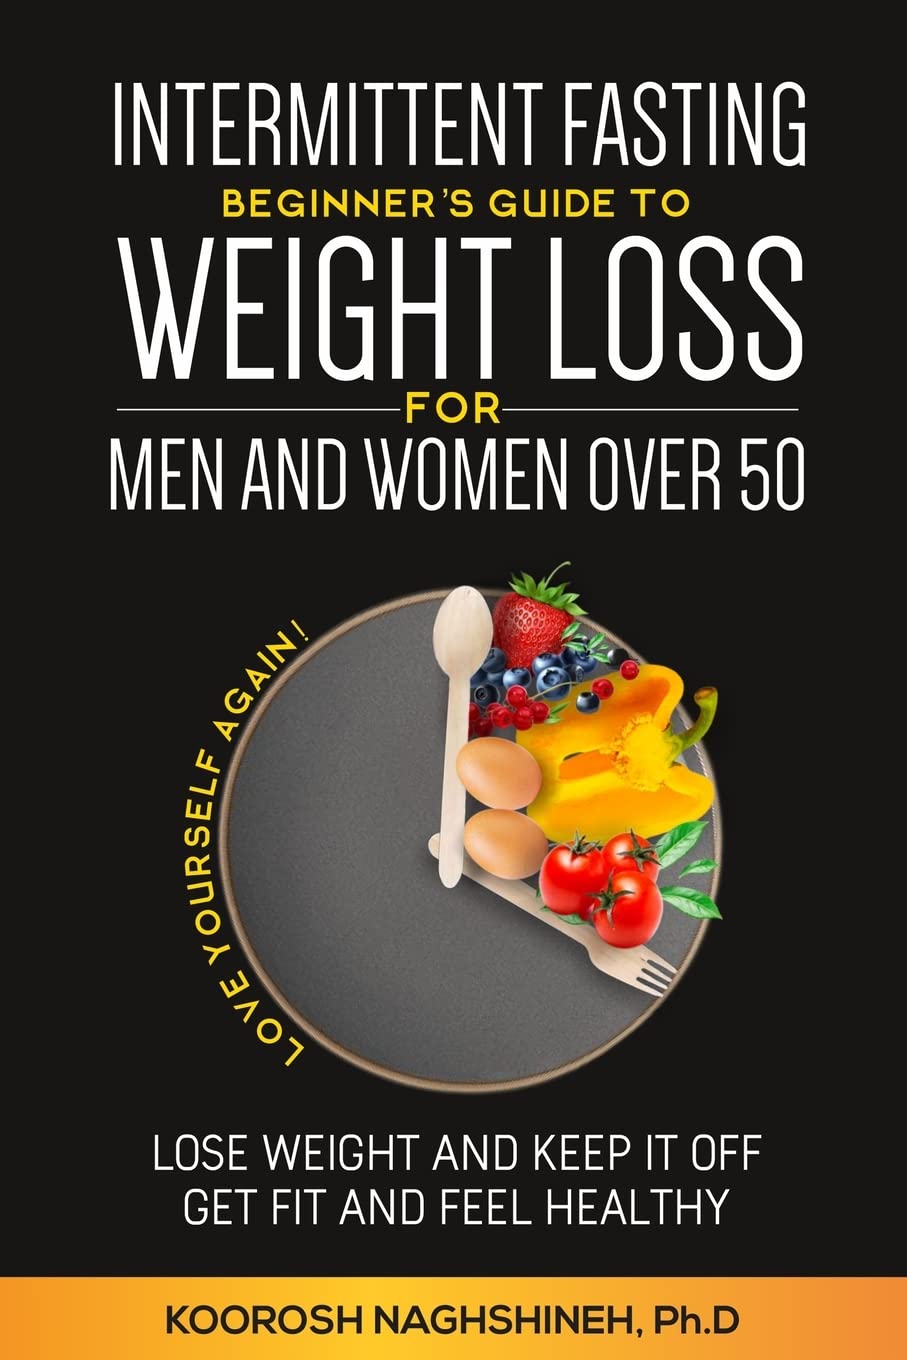 Intermittent fasting: Beginner's Guide To Weight Loss For Men And Women Over 50 - SureShot Books Publishing LLC